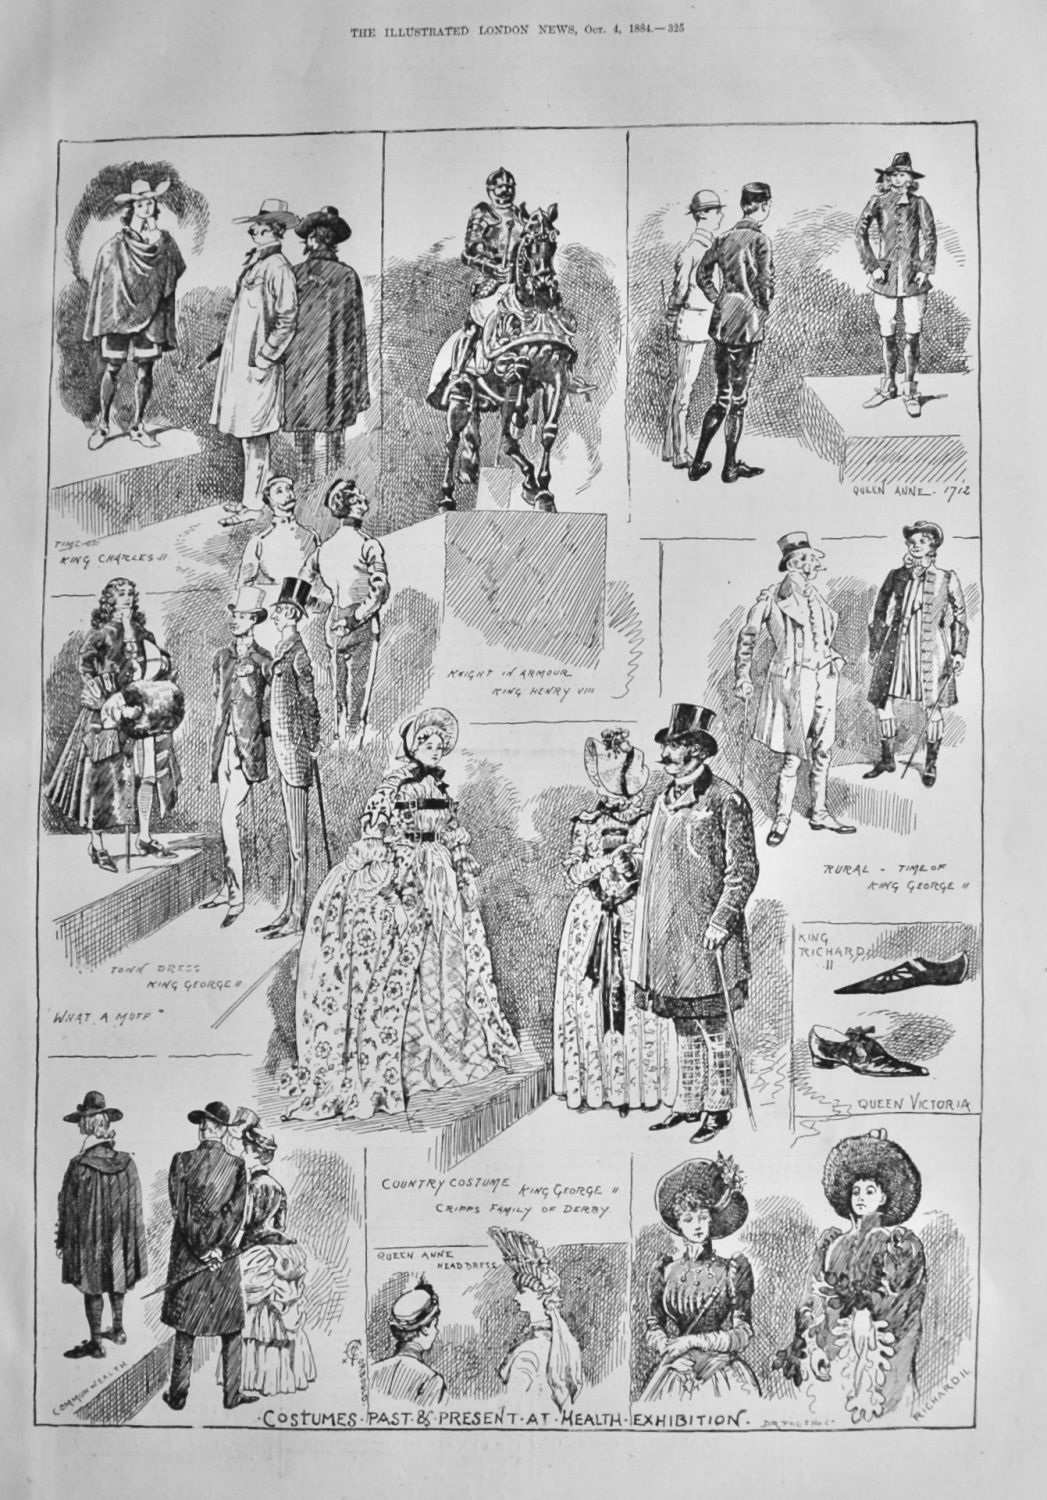 Costumes Past & Present at Health Exhibition.  1884.